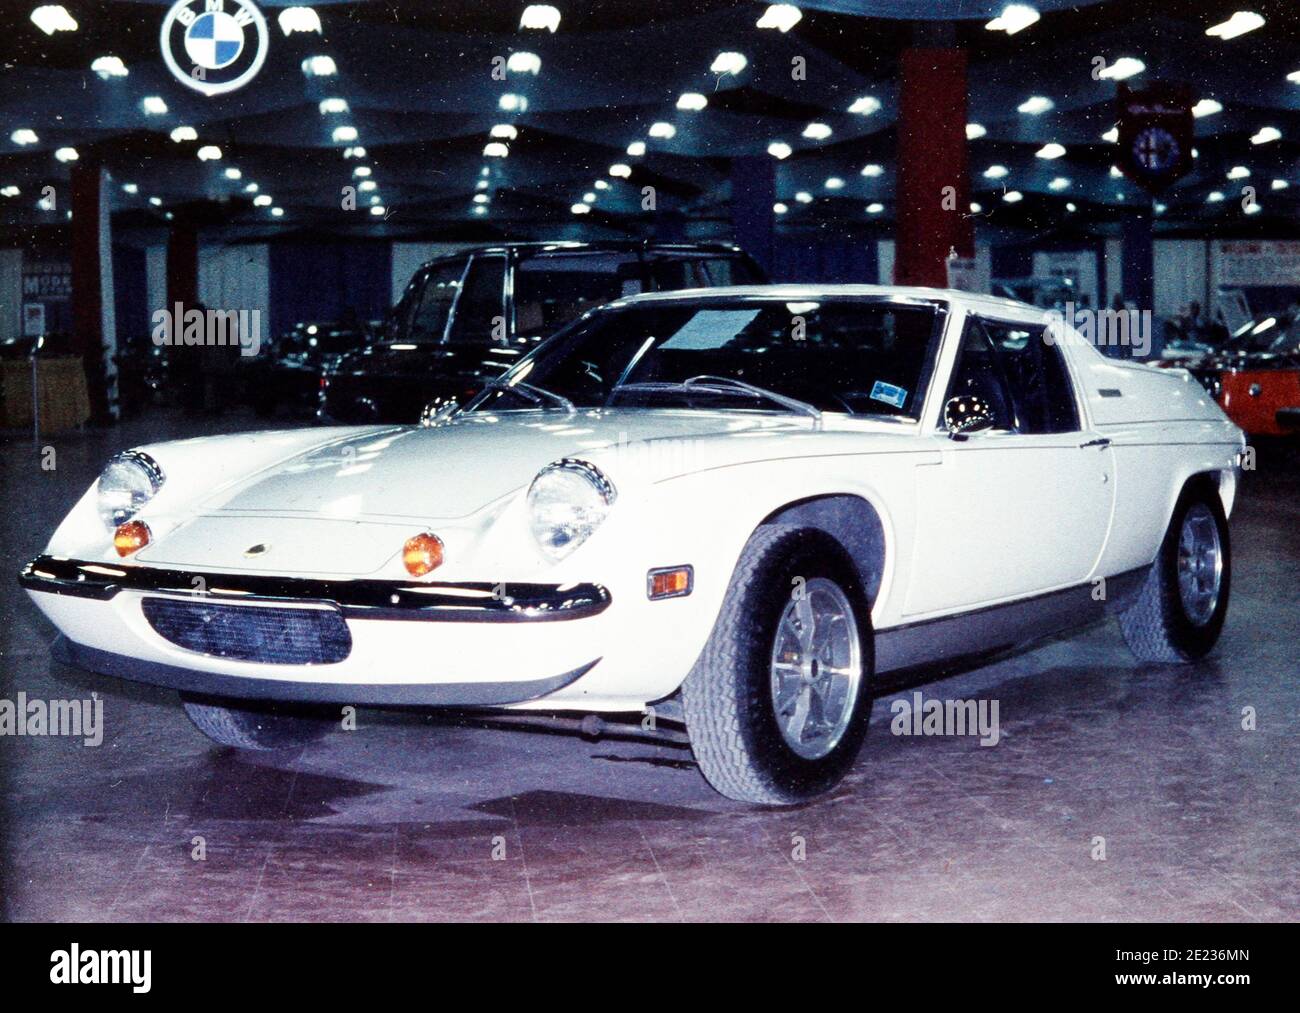 New BMW Being showcased at a Car Show in 1975 Stock Photo